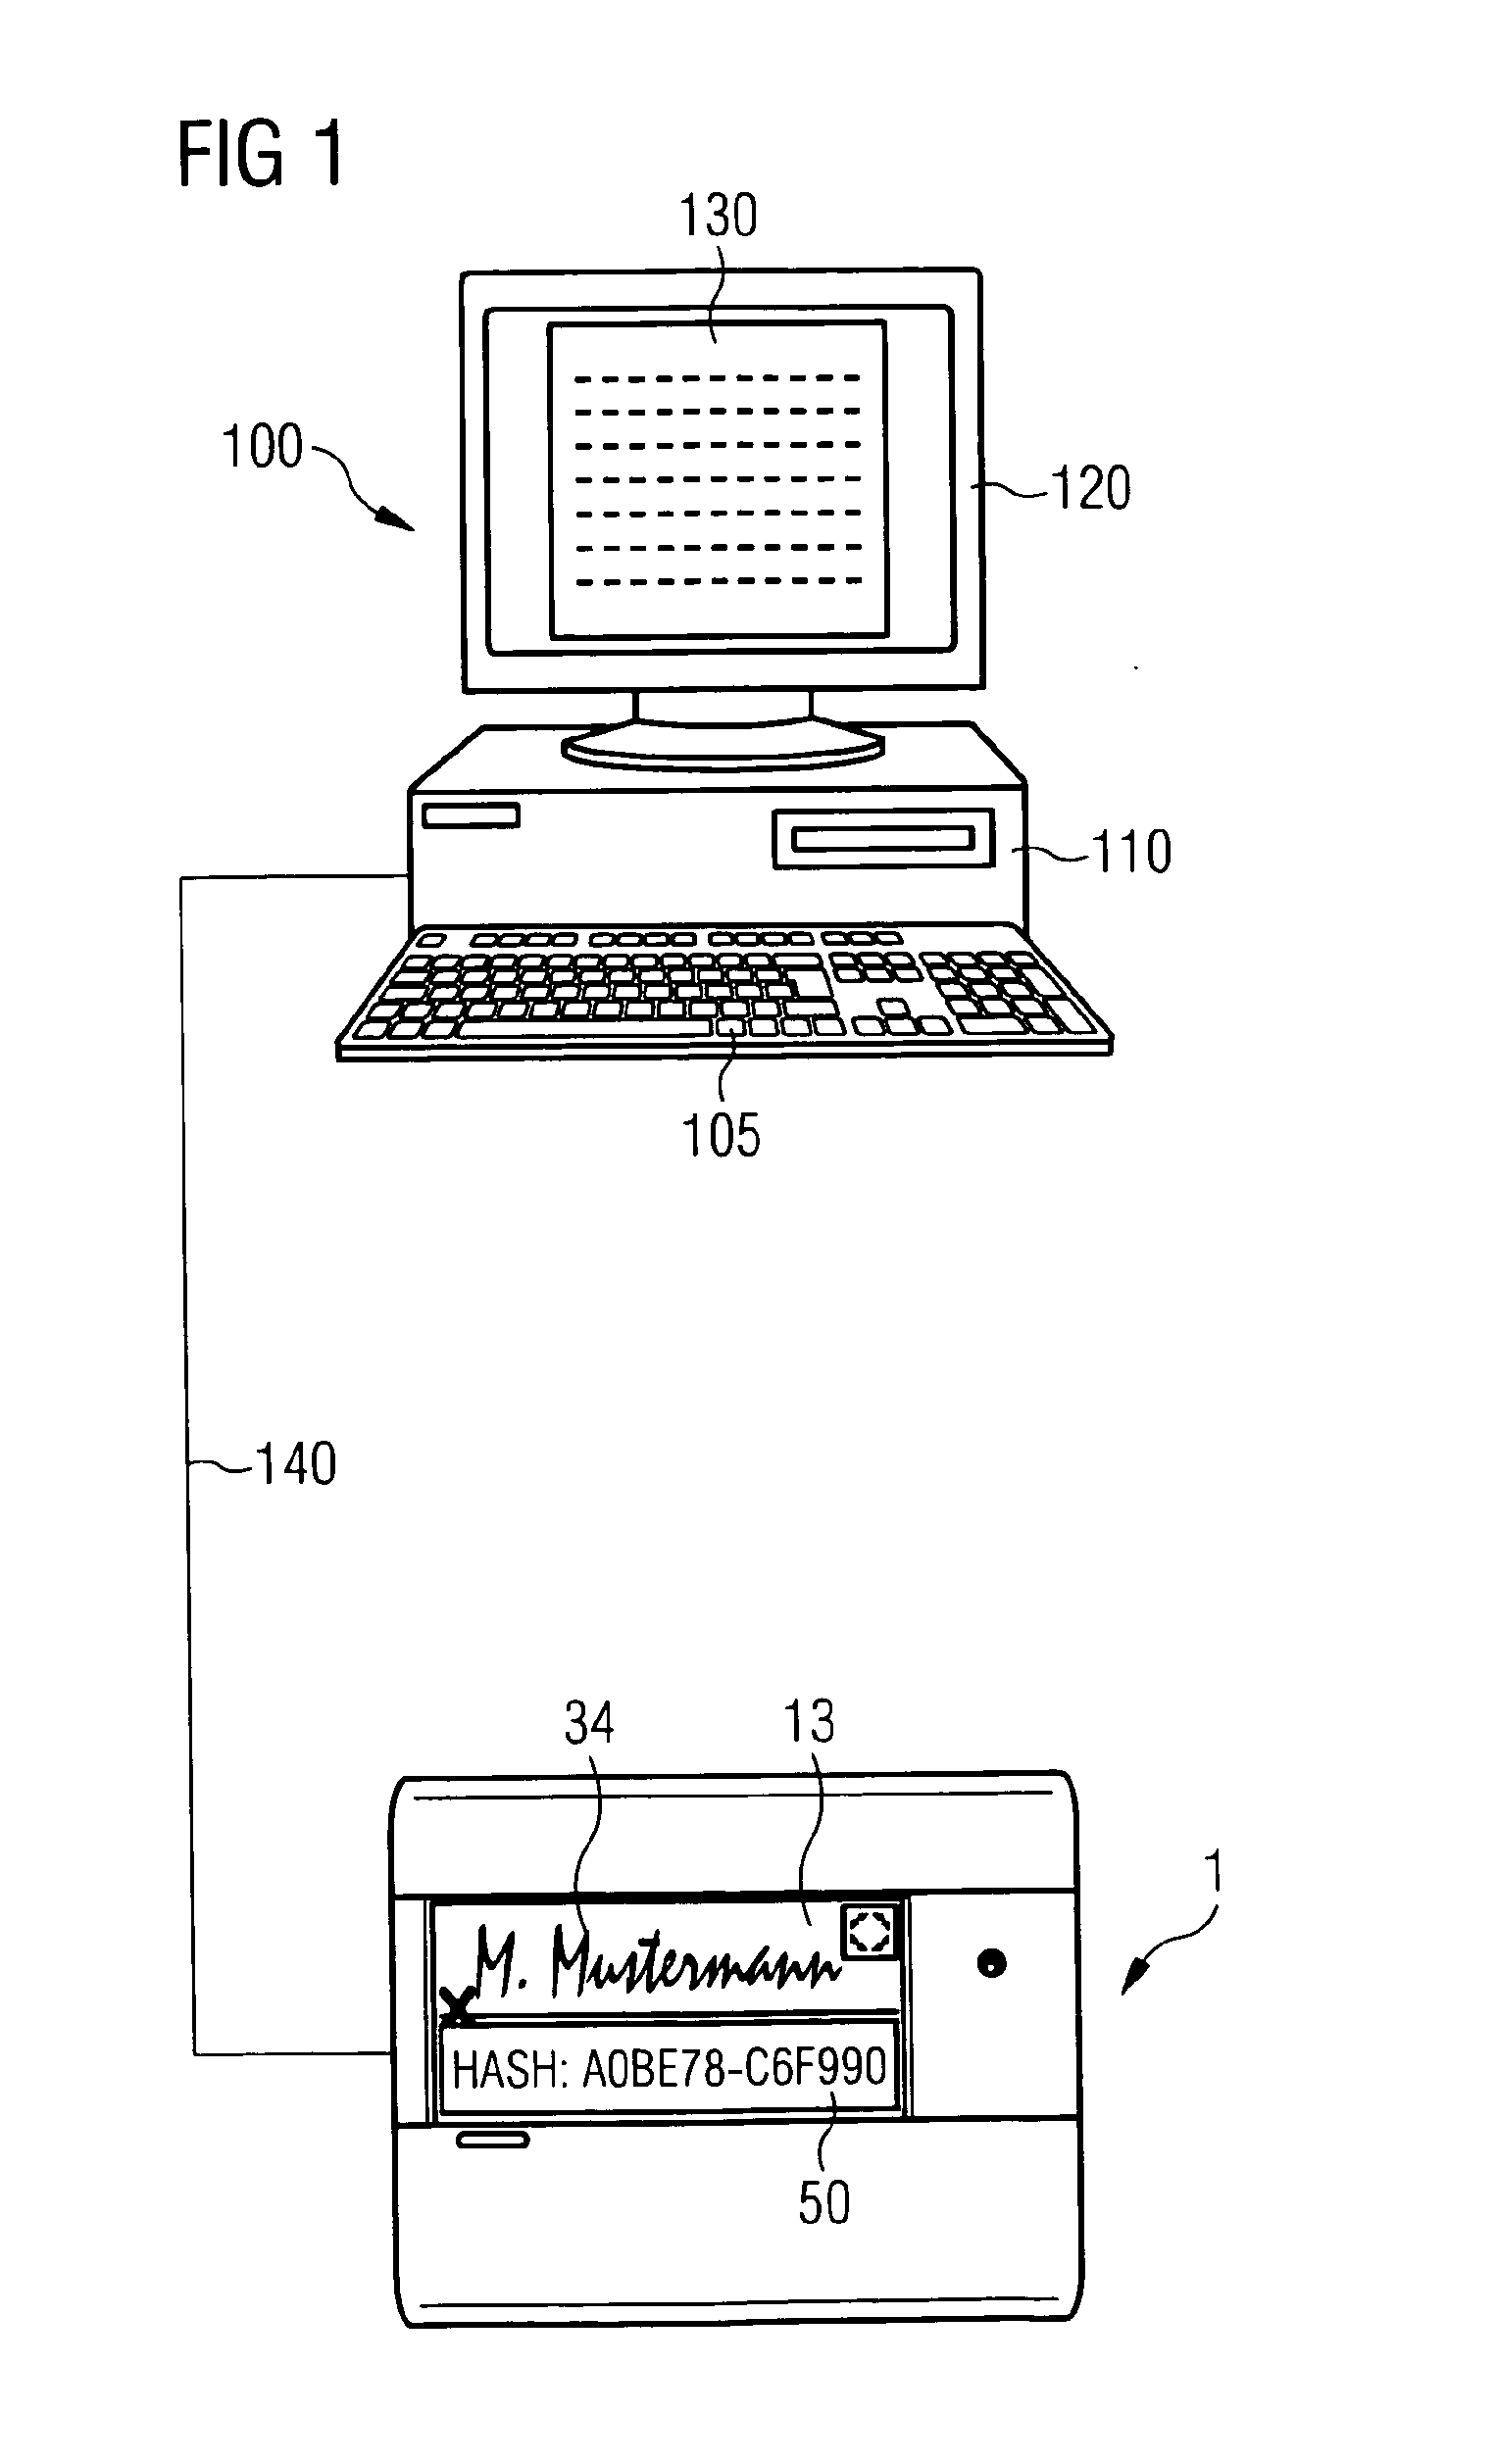 Method and device for electronically capturing a handwritten signature and safeguarding biometric data